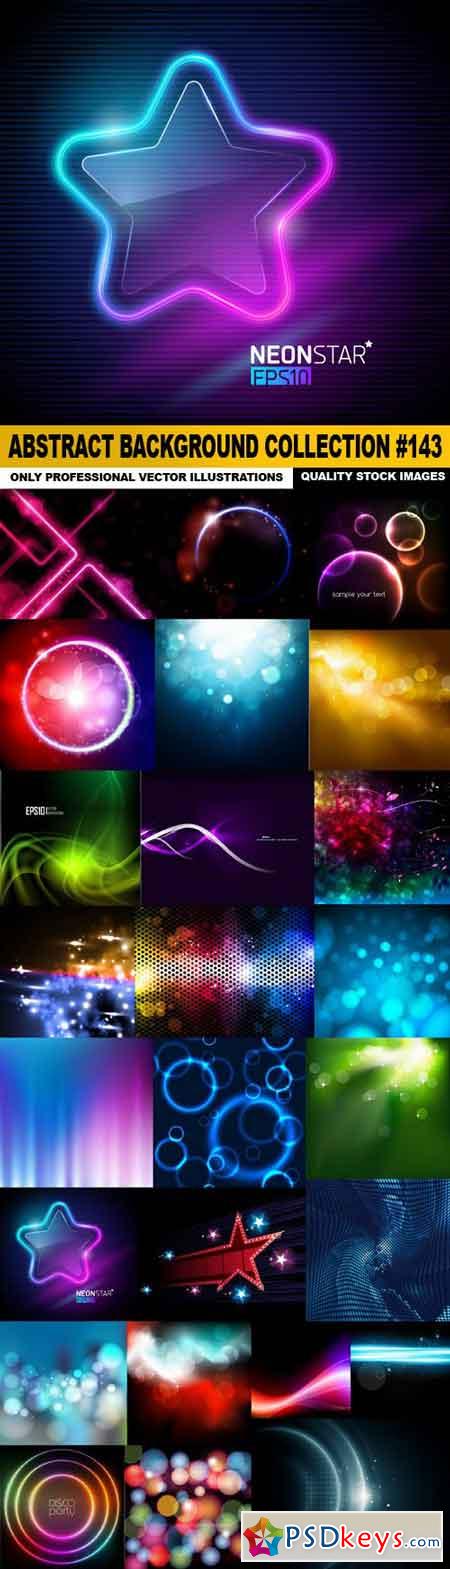 Abstract Background Collection #143 - 25 Vector